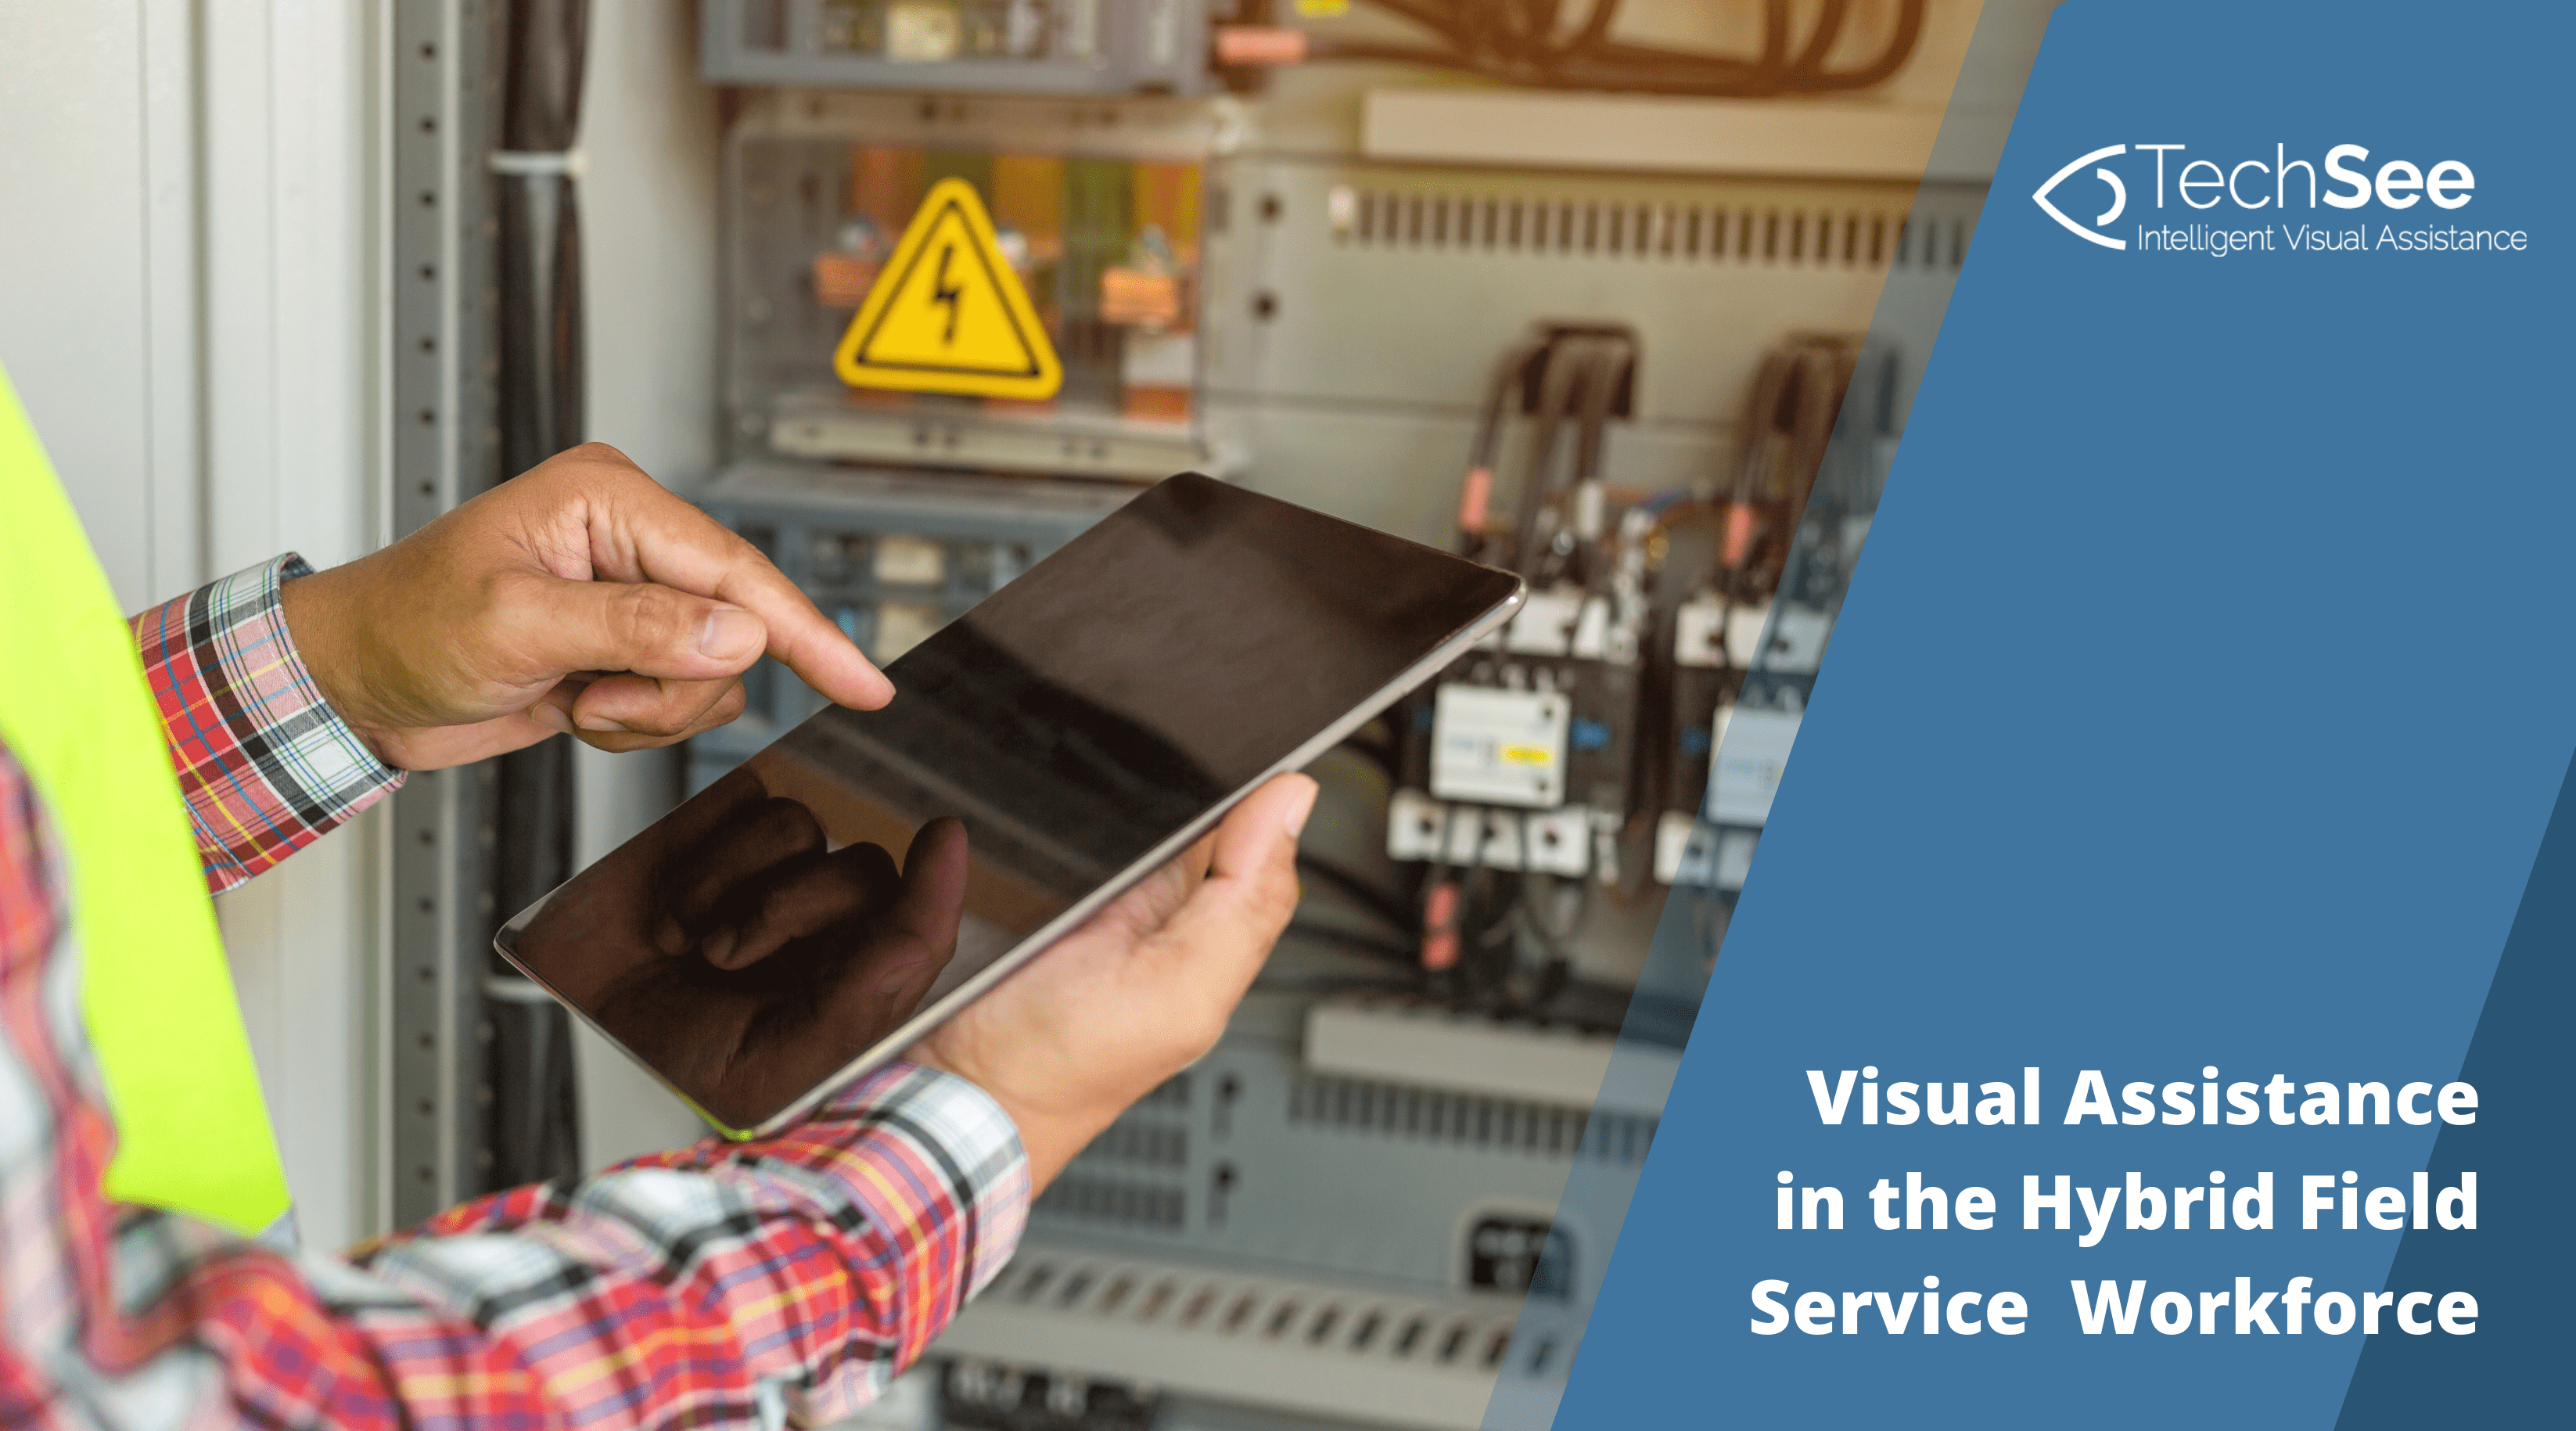 Read how visual assistance plays a key role in the new hybrid field service workforce.